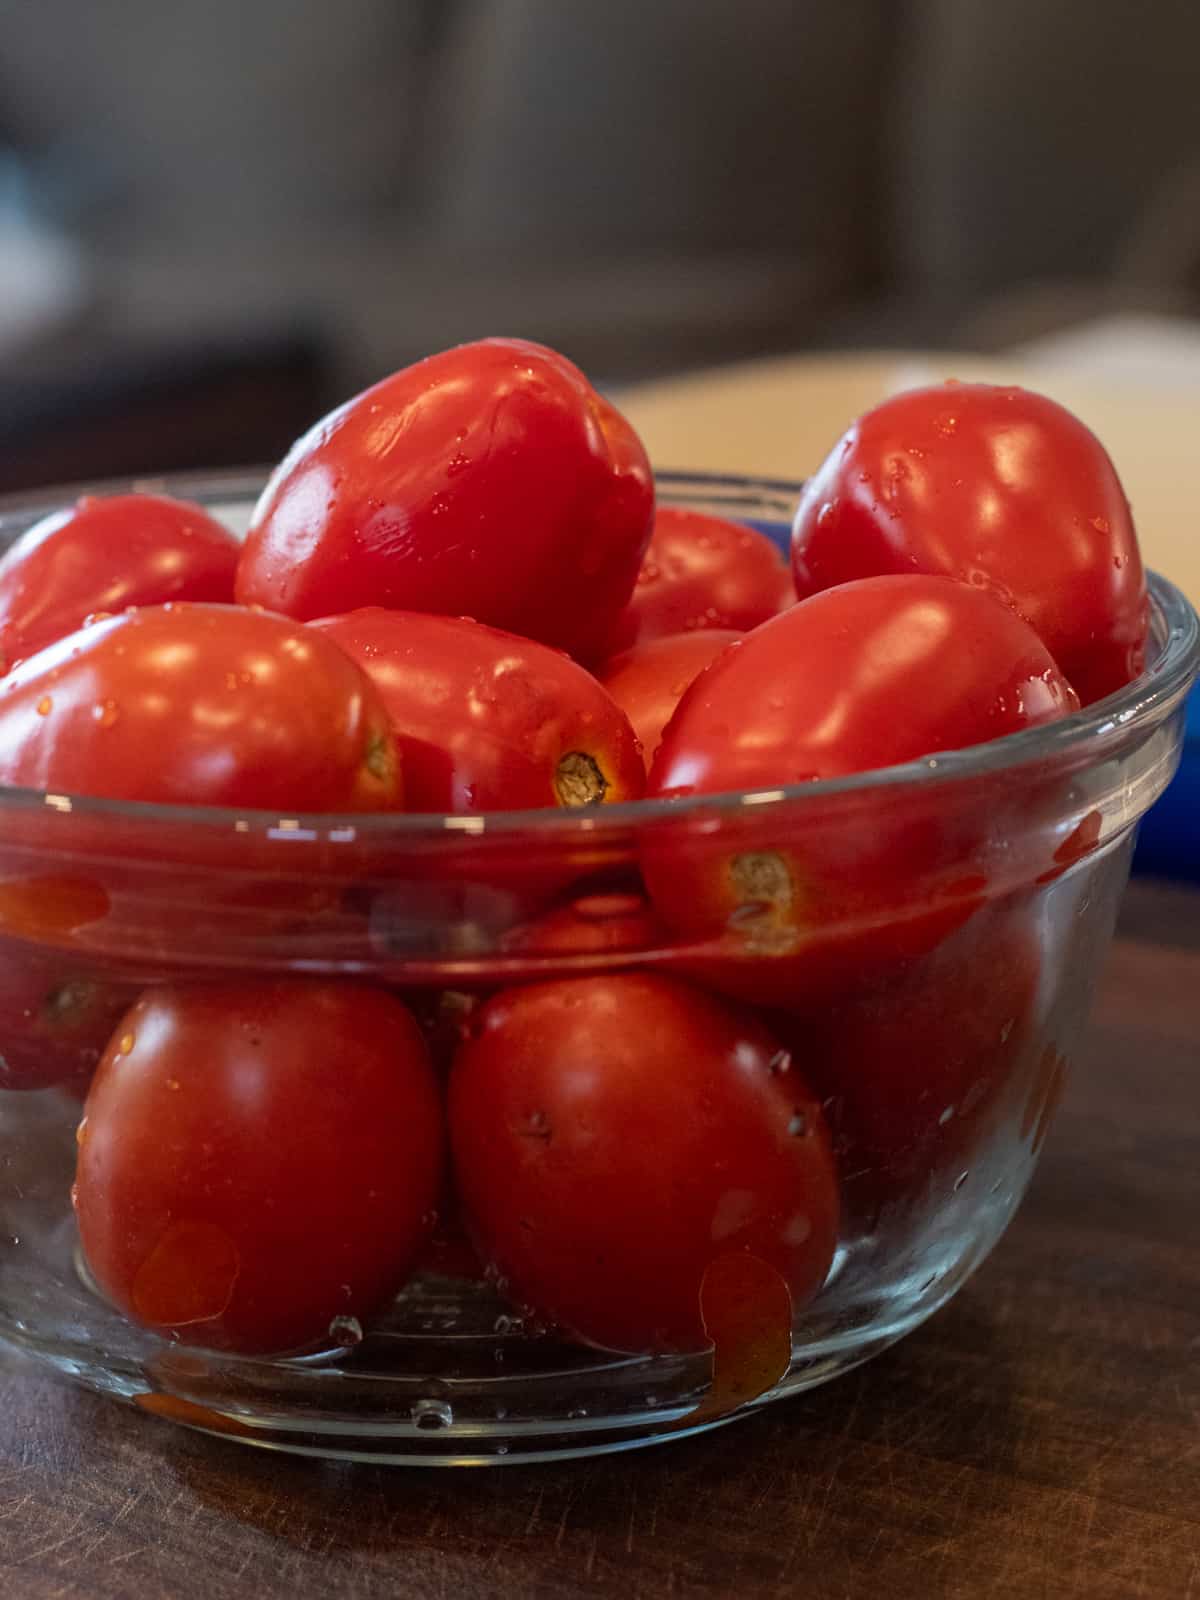 A glass bowl filled with plum tomatoes.